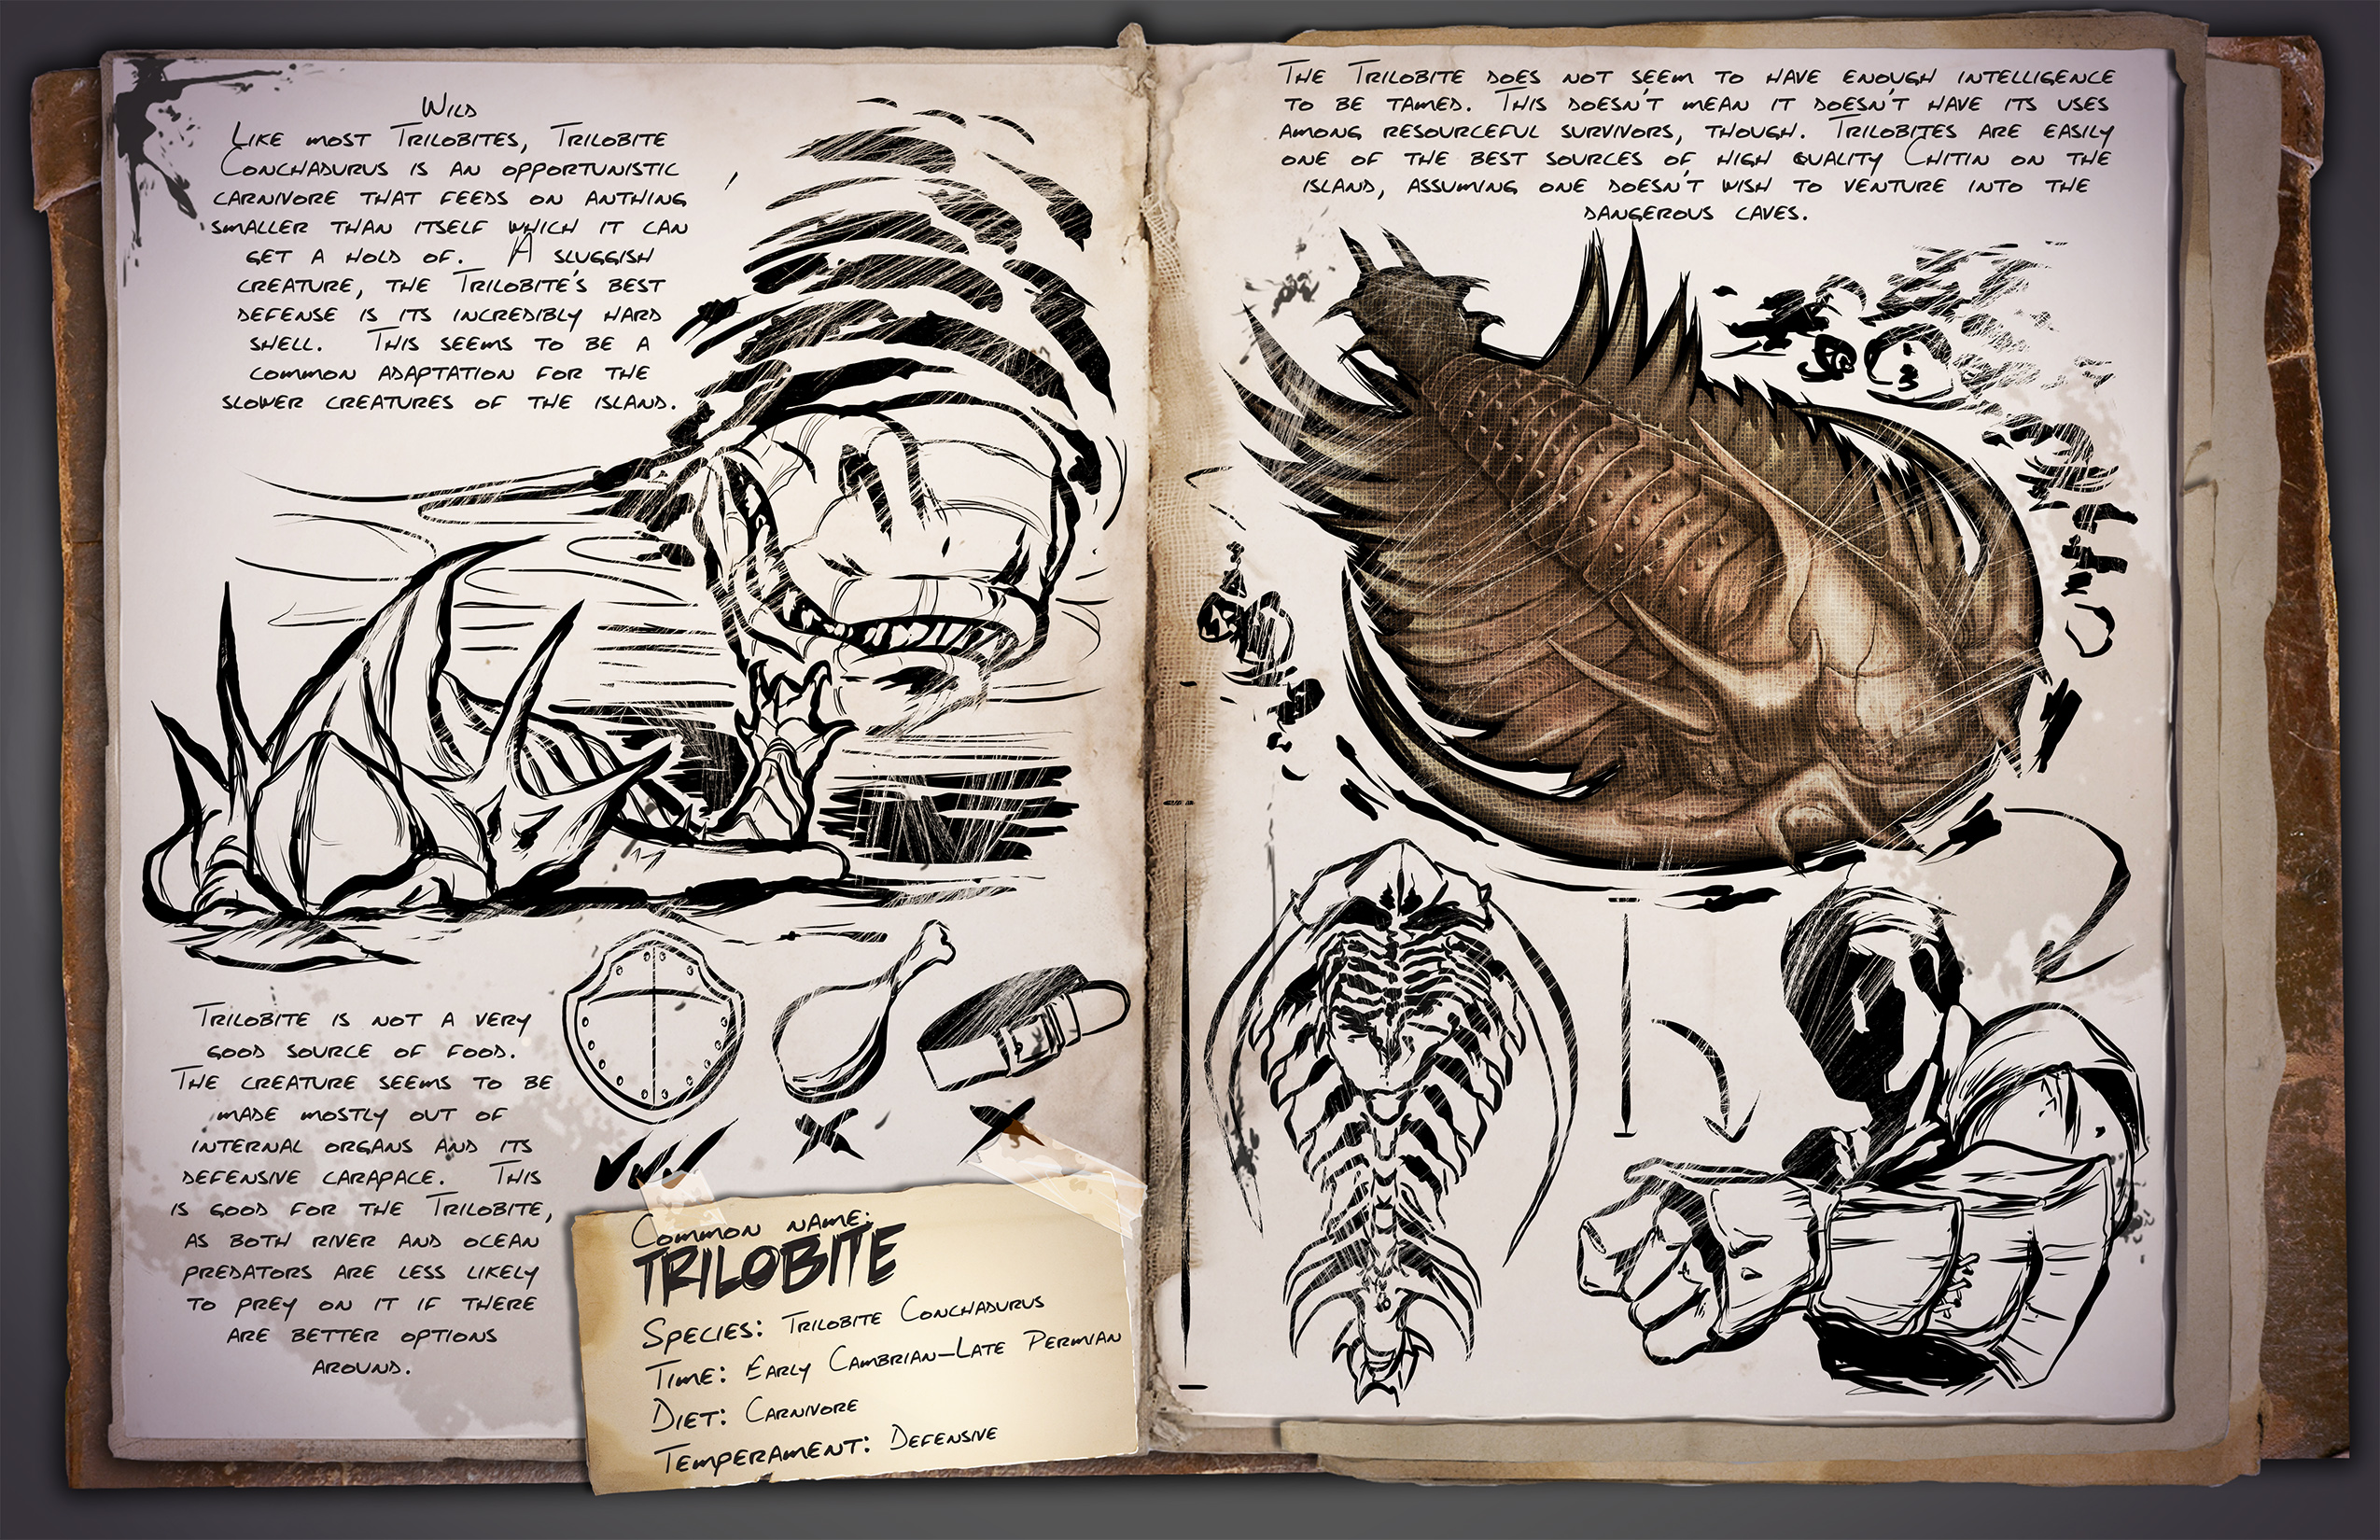 Steam :: ARK: Survival Evolved :: Introducing the Trilobite! 